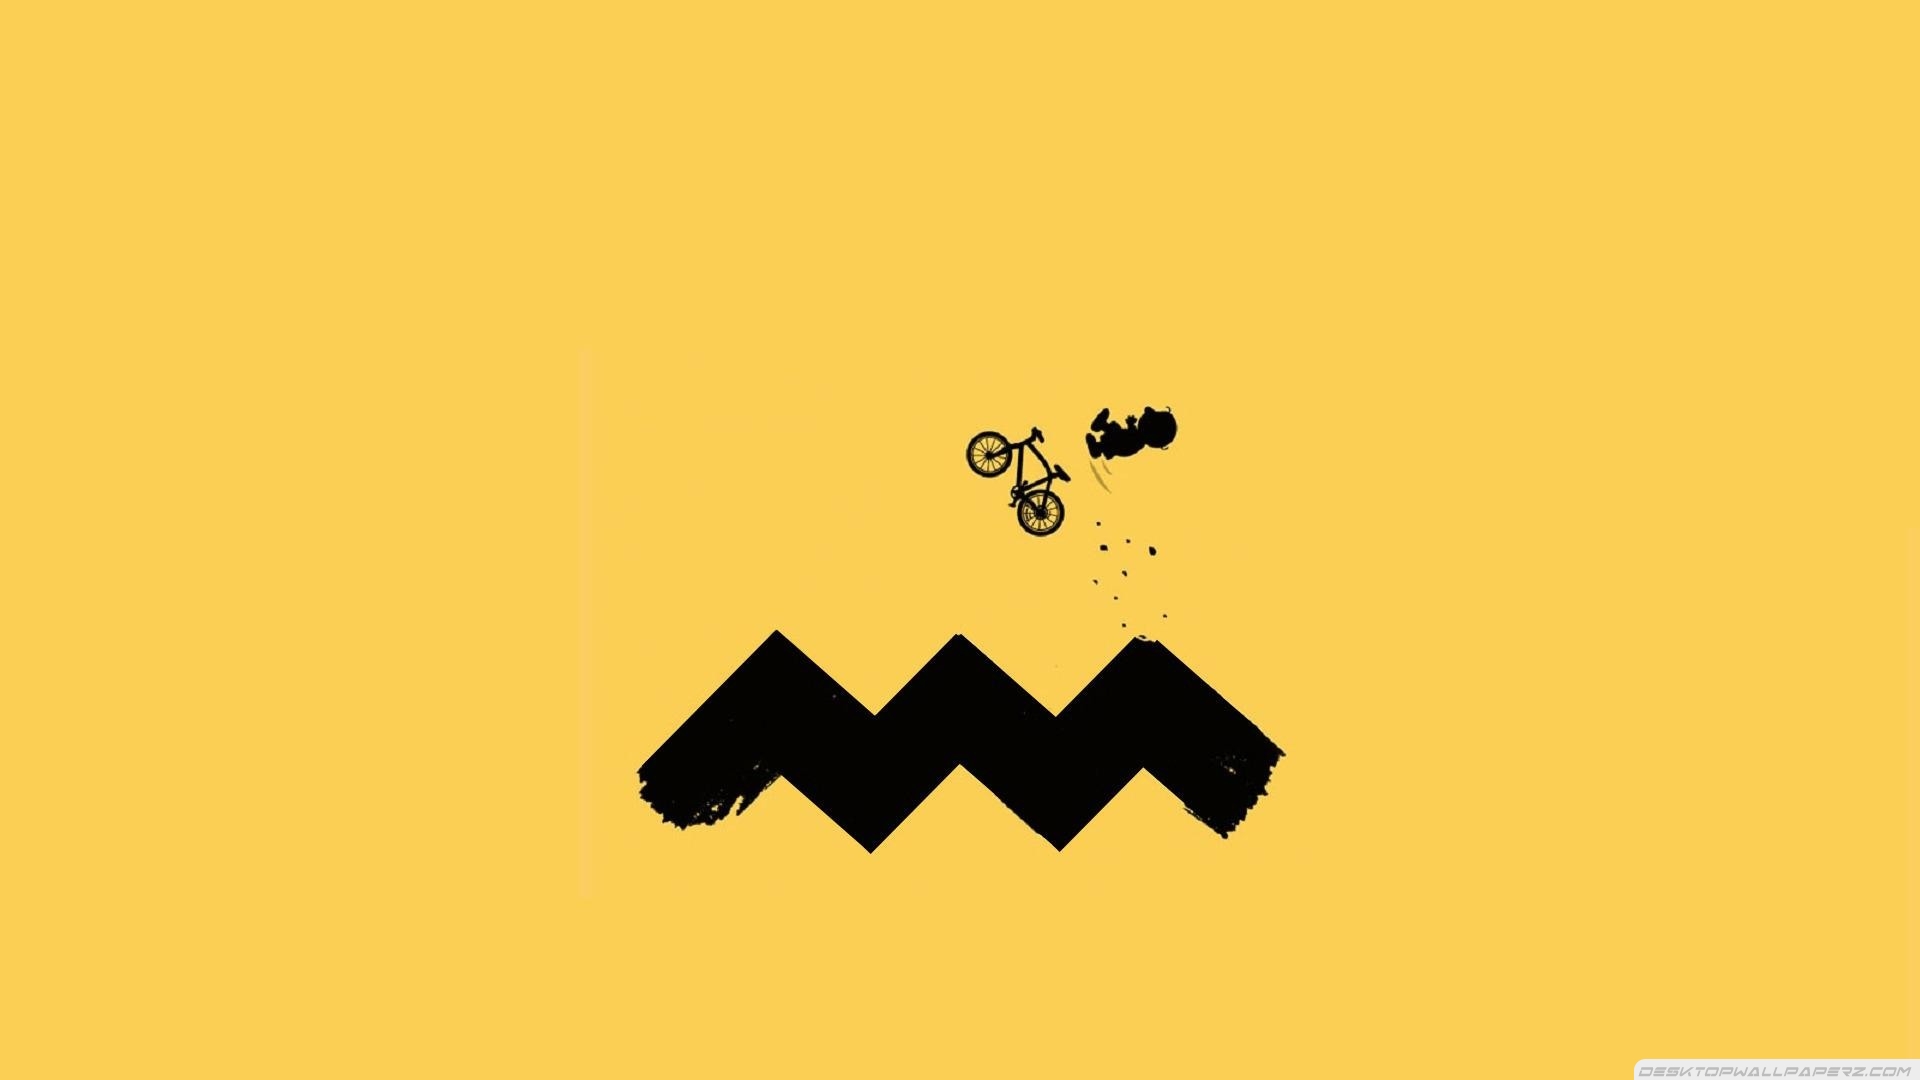 Minimalistic Funny Charlie Brown Cycling 19202151080 32476